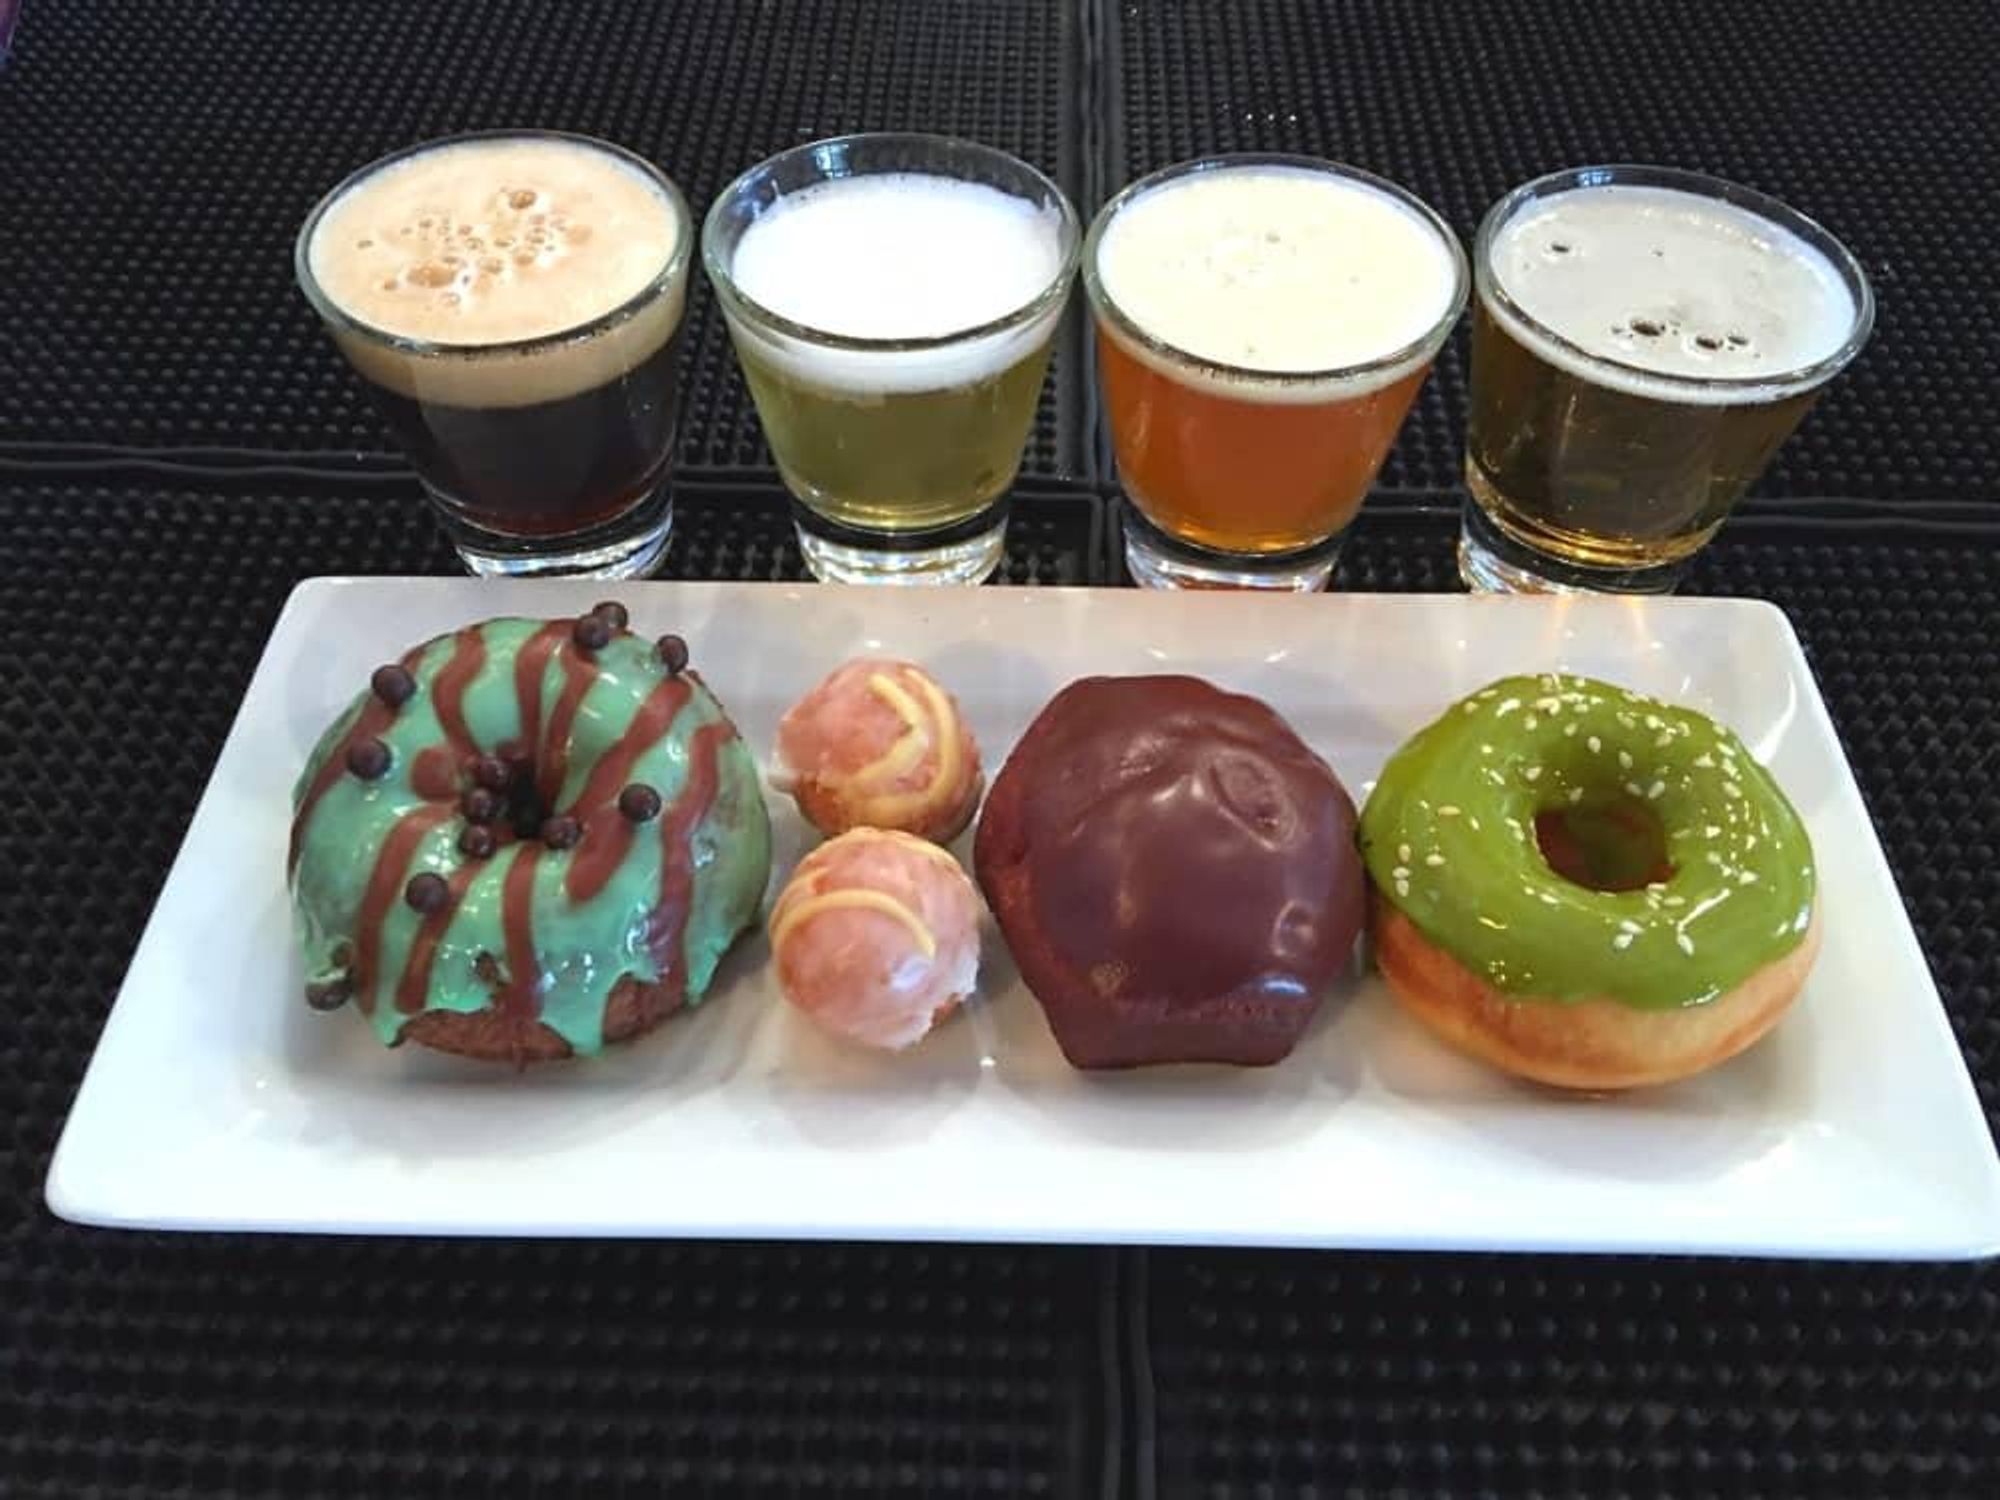 Doughnut and beer pairing at LUCK Trinity Groves